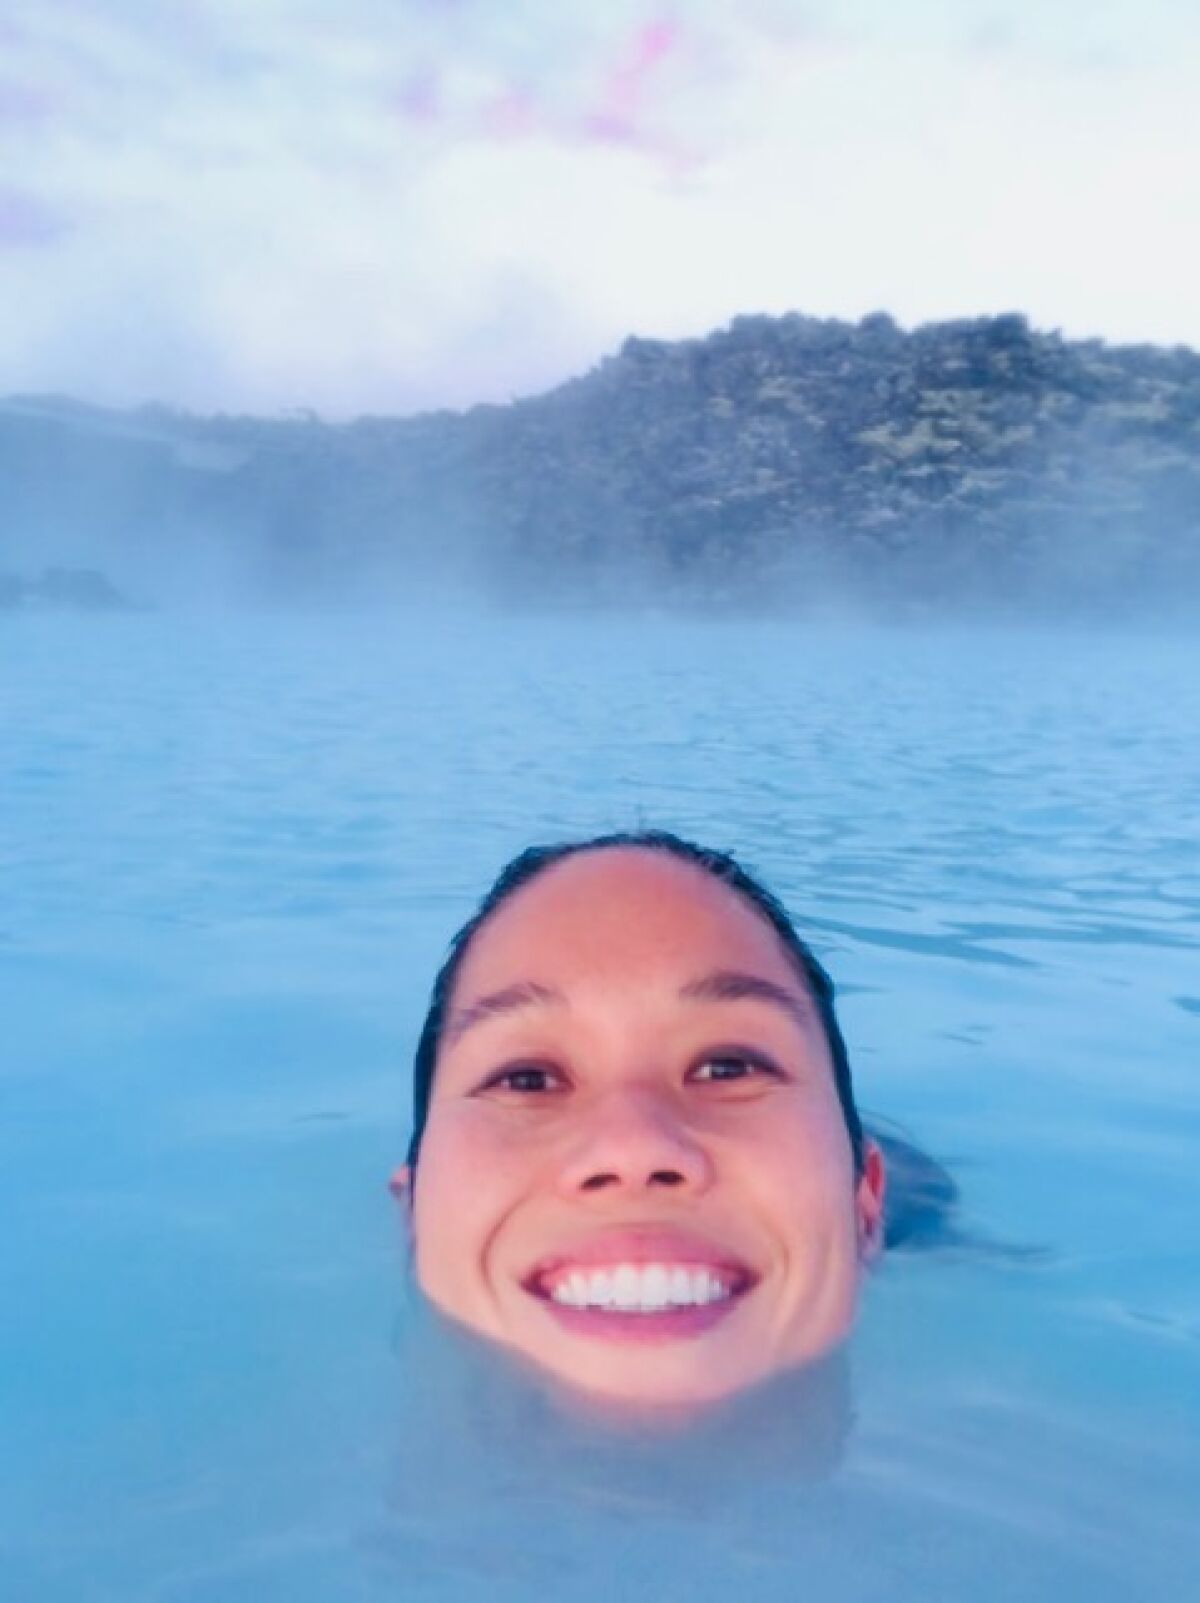 Bonnie Tsui, author of "Why We Swim," in an Icelandic hot pool.